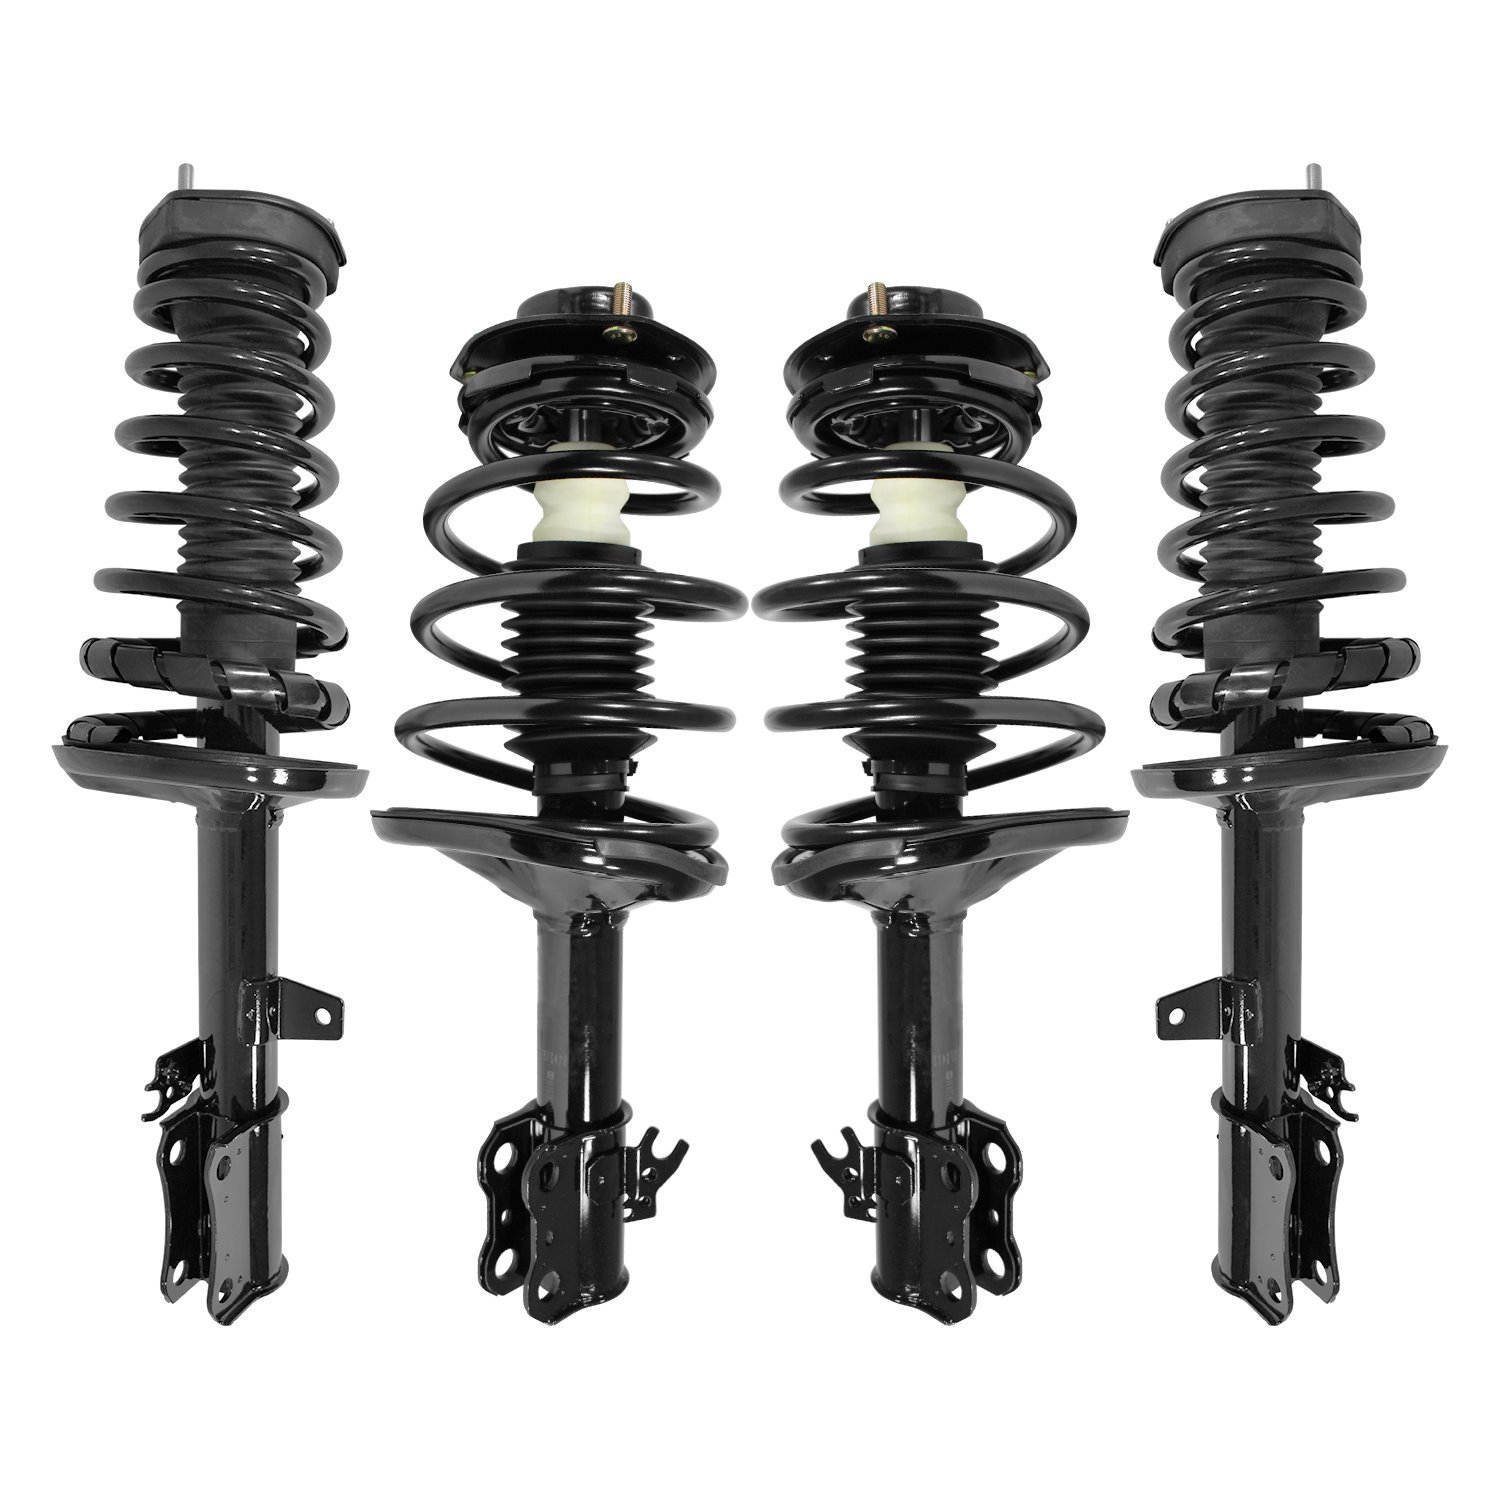 4-11471-15321-001 Front & Rear Suspension Strut & Coil Spring Assembly Kit Fits Select Toyota Camry